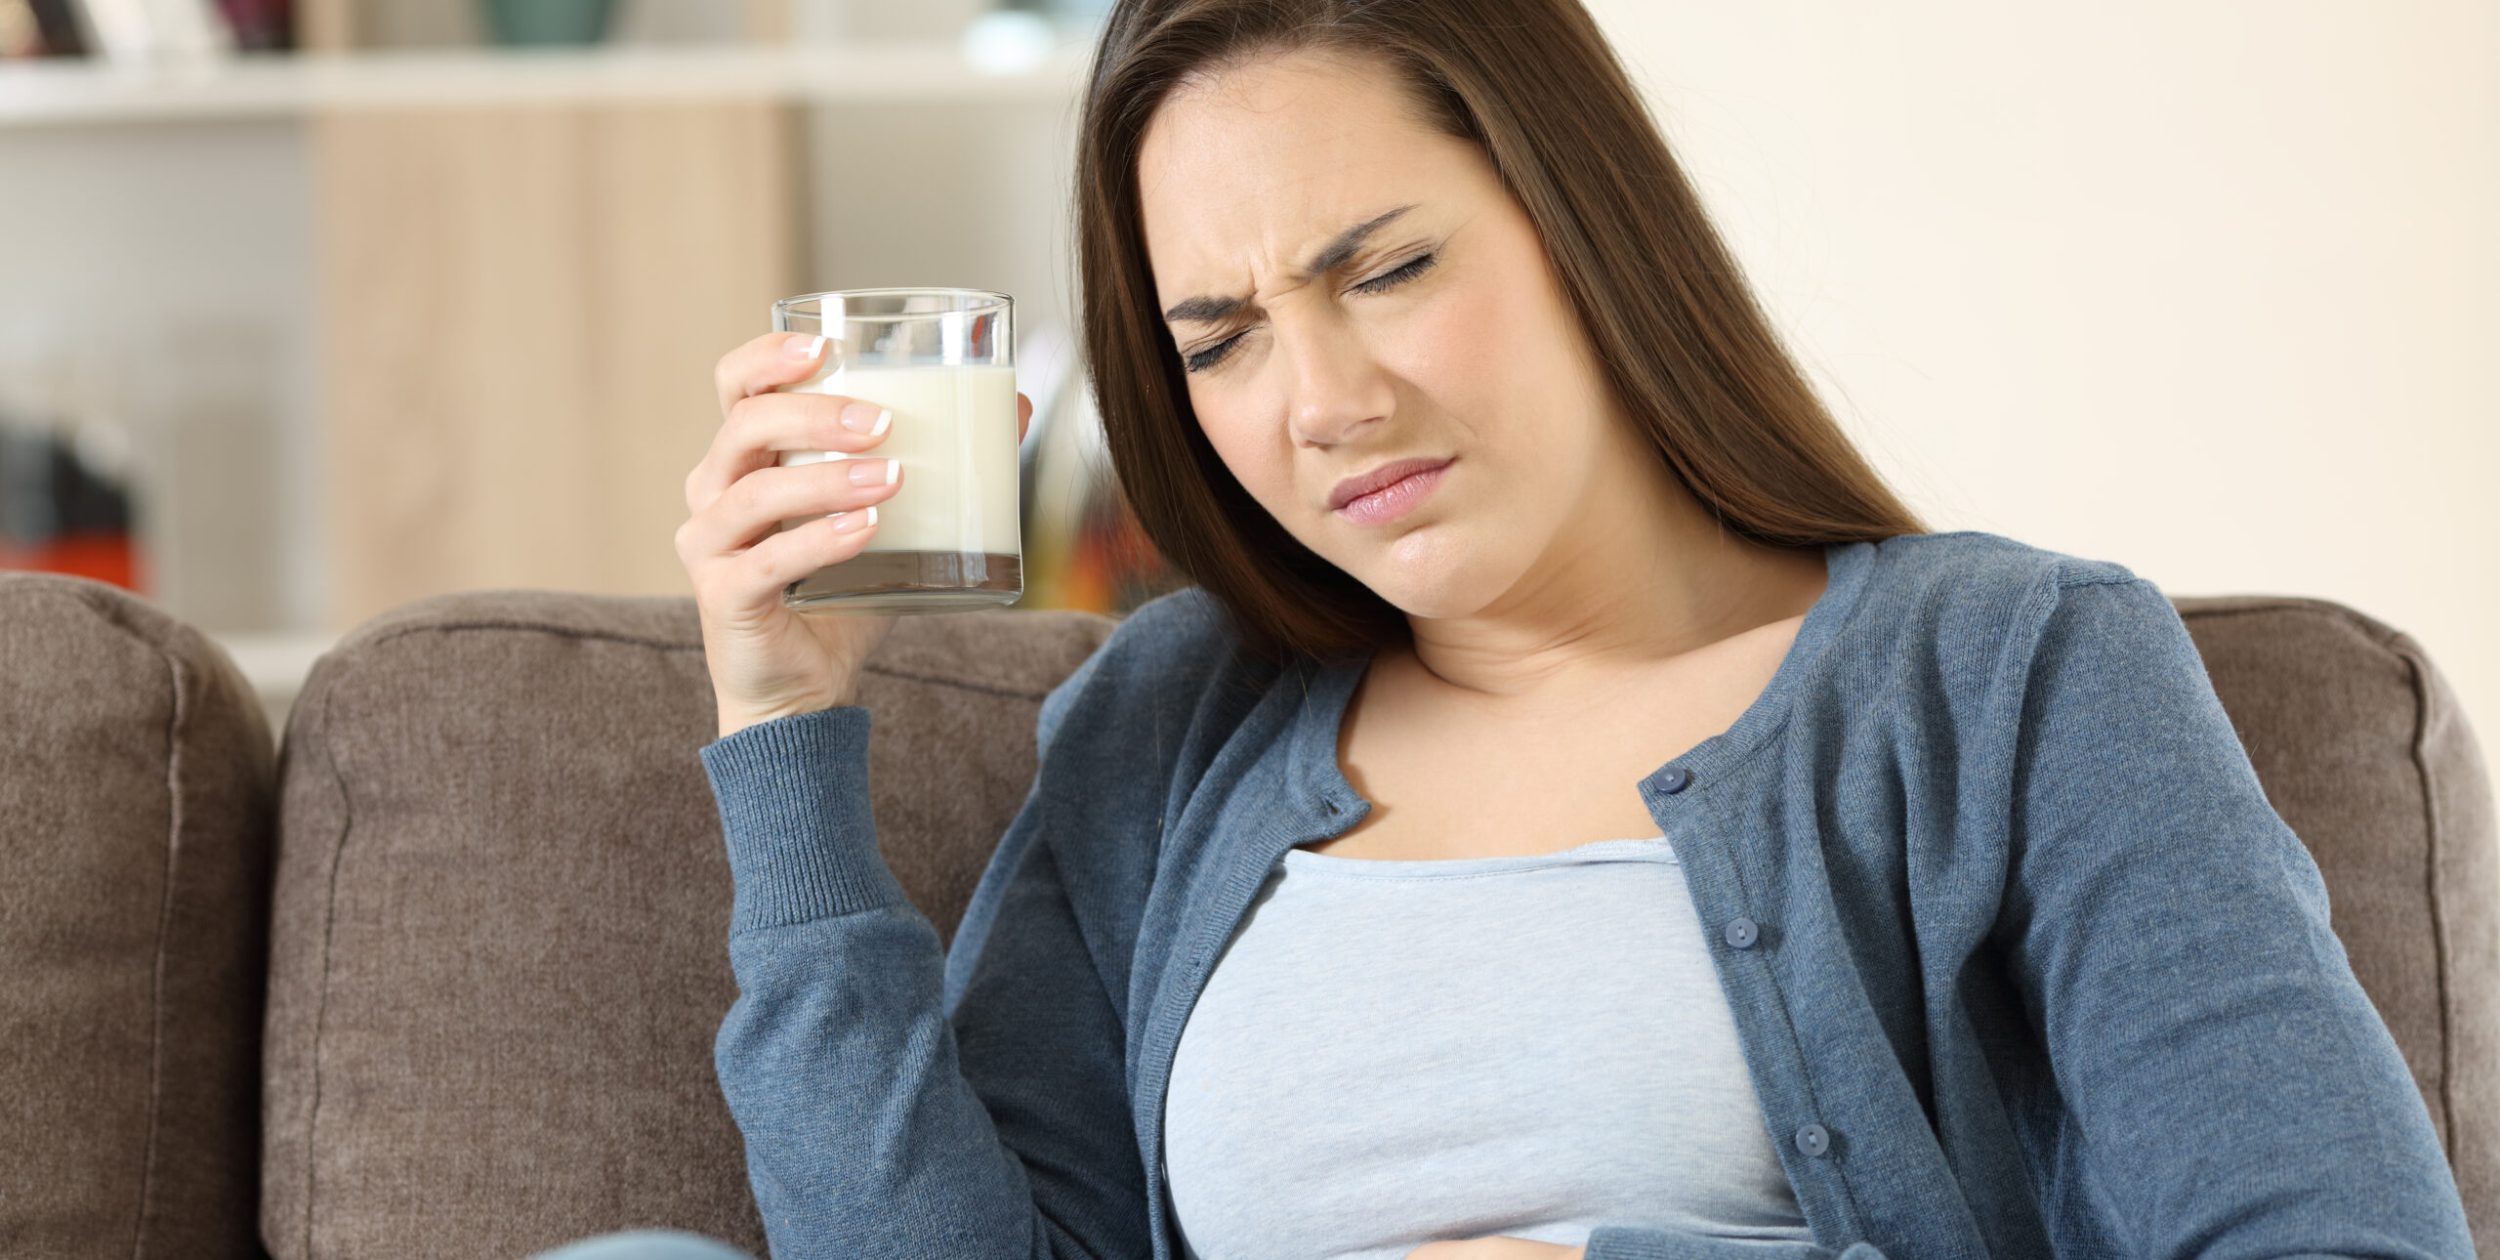 Digestive issues can range from small indigestion, diarrhea or upset stomach to major symptoms that impact your life. Functional nutritionists can help identify issues like lactose intolerance or other allergens to eliminate your digestive issues.